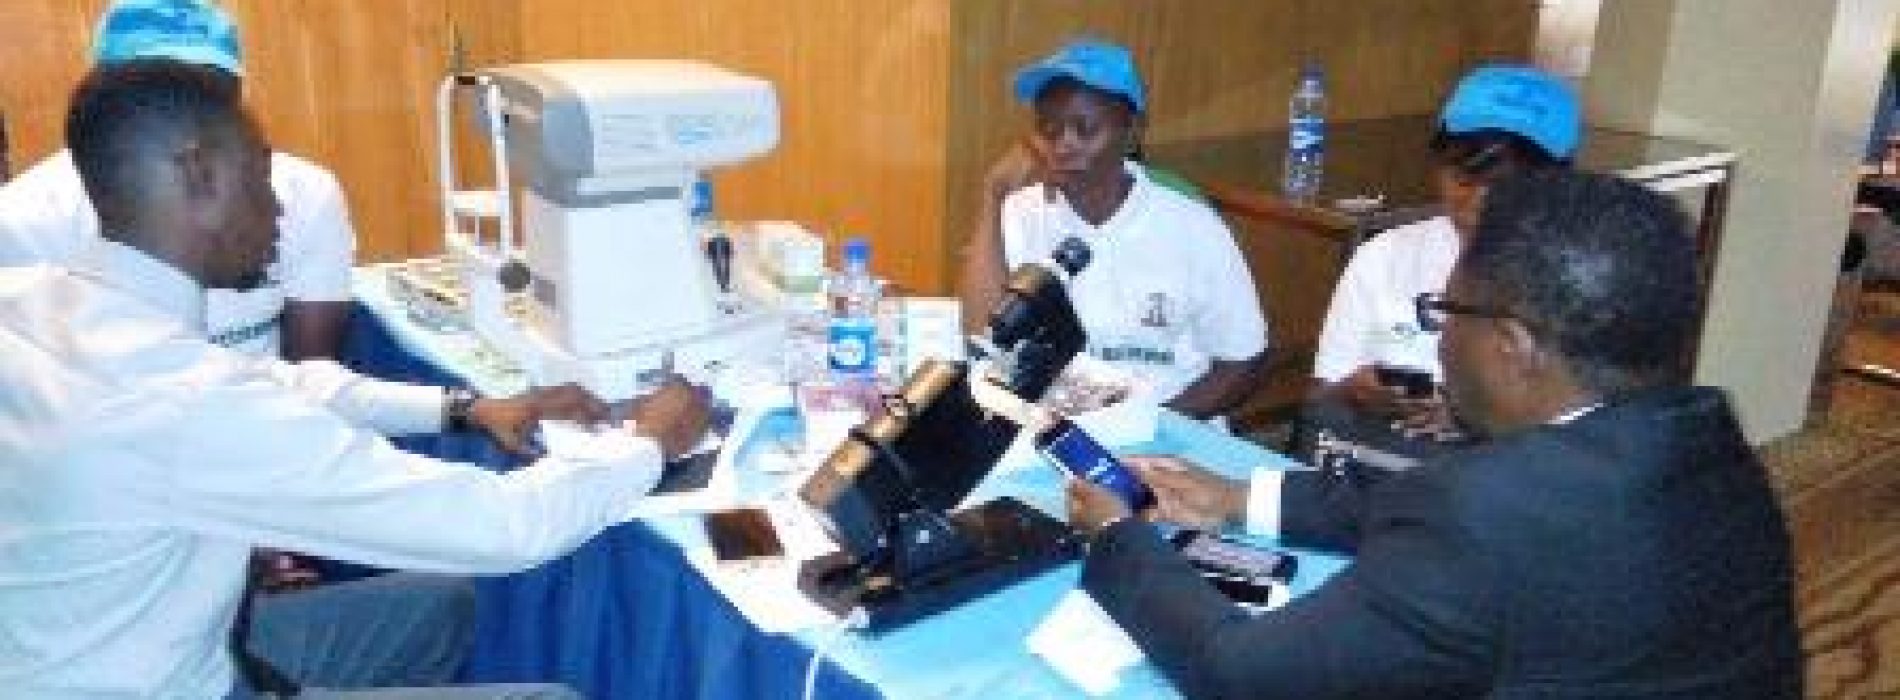 Bank, others launch free eye care for children